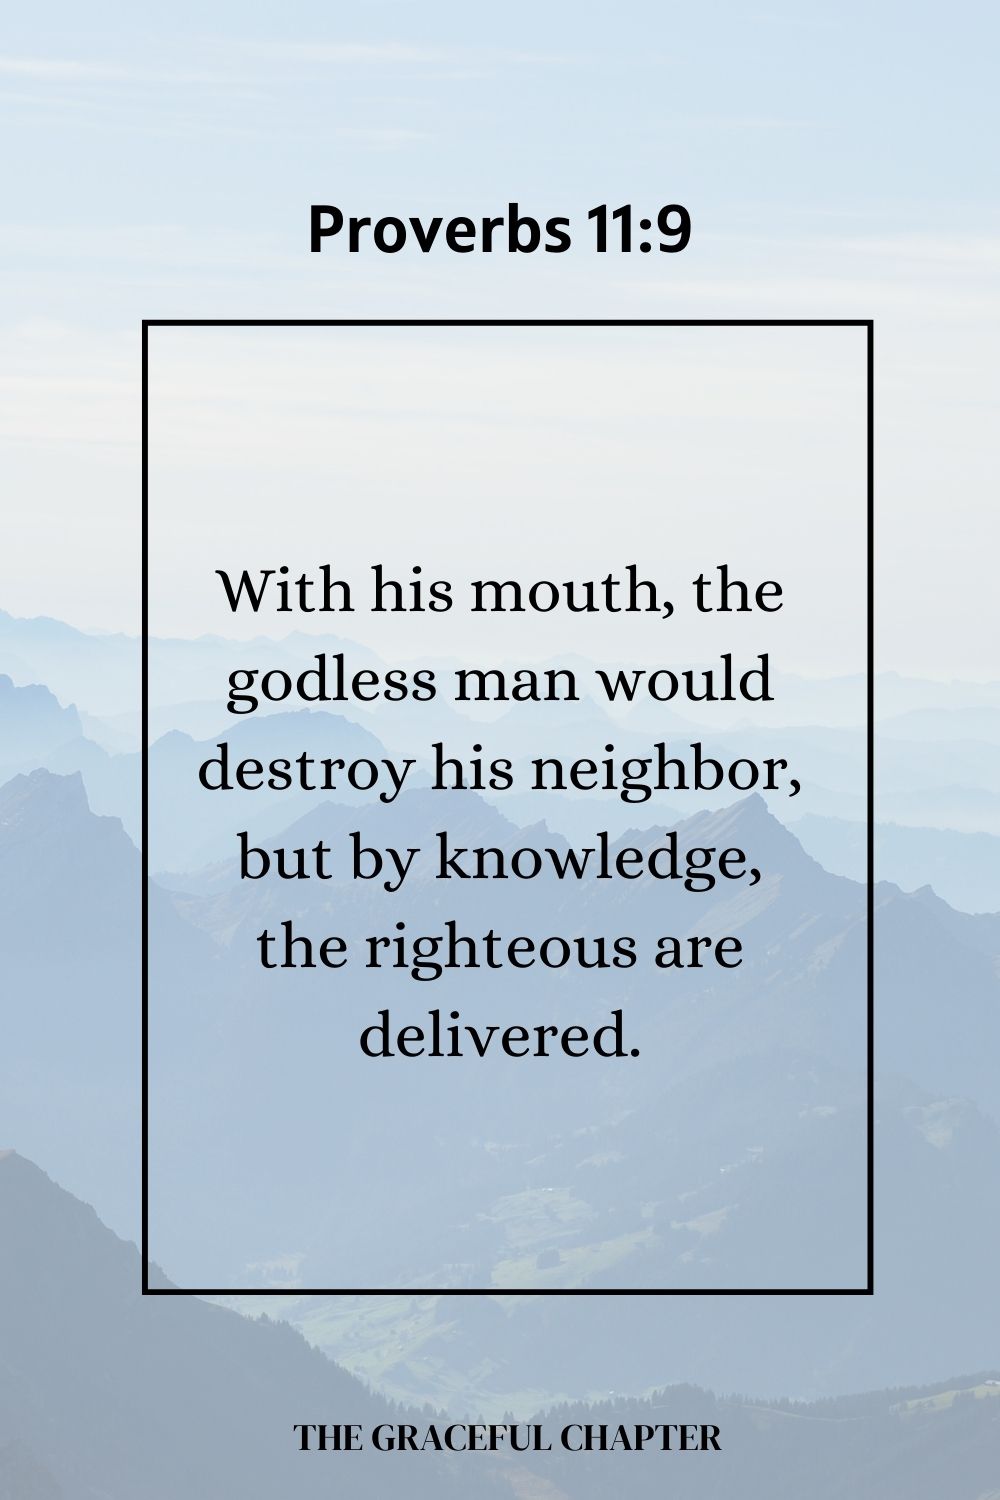 With his mouth, the godless man would destroy his neighbor,  but by knowledge, the righteous are delivered. Proverbs 11:9